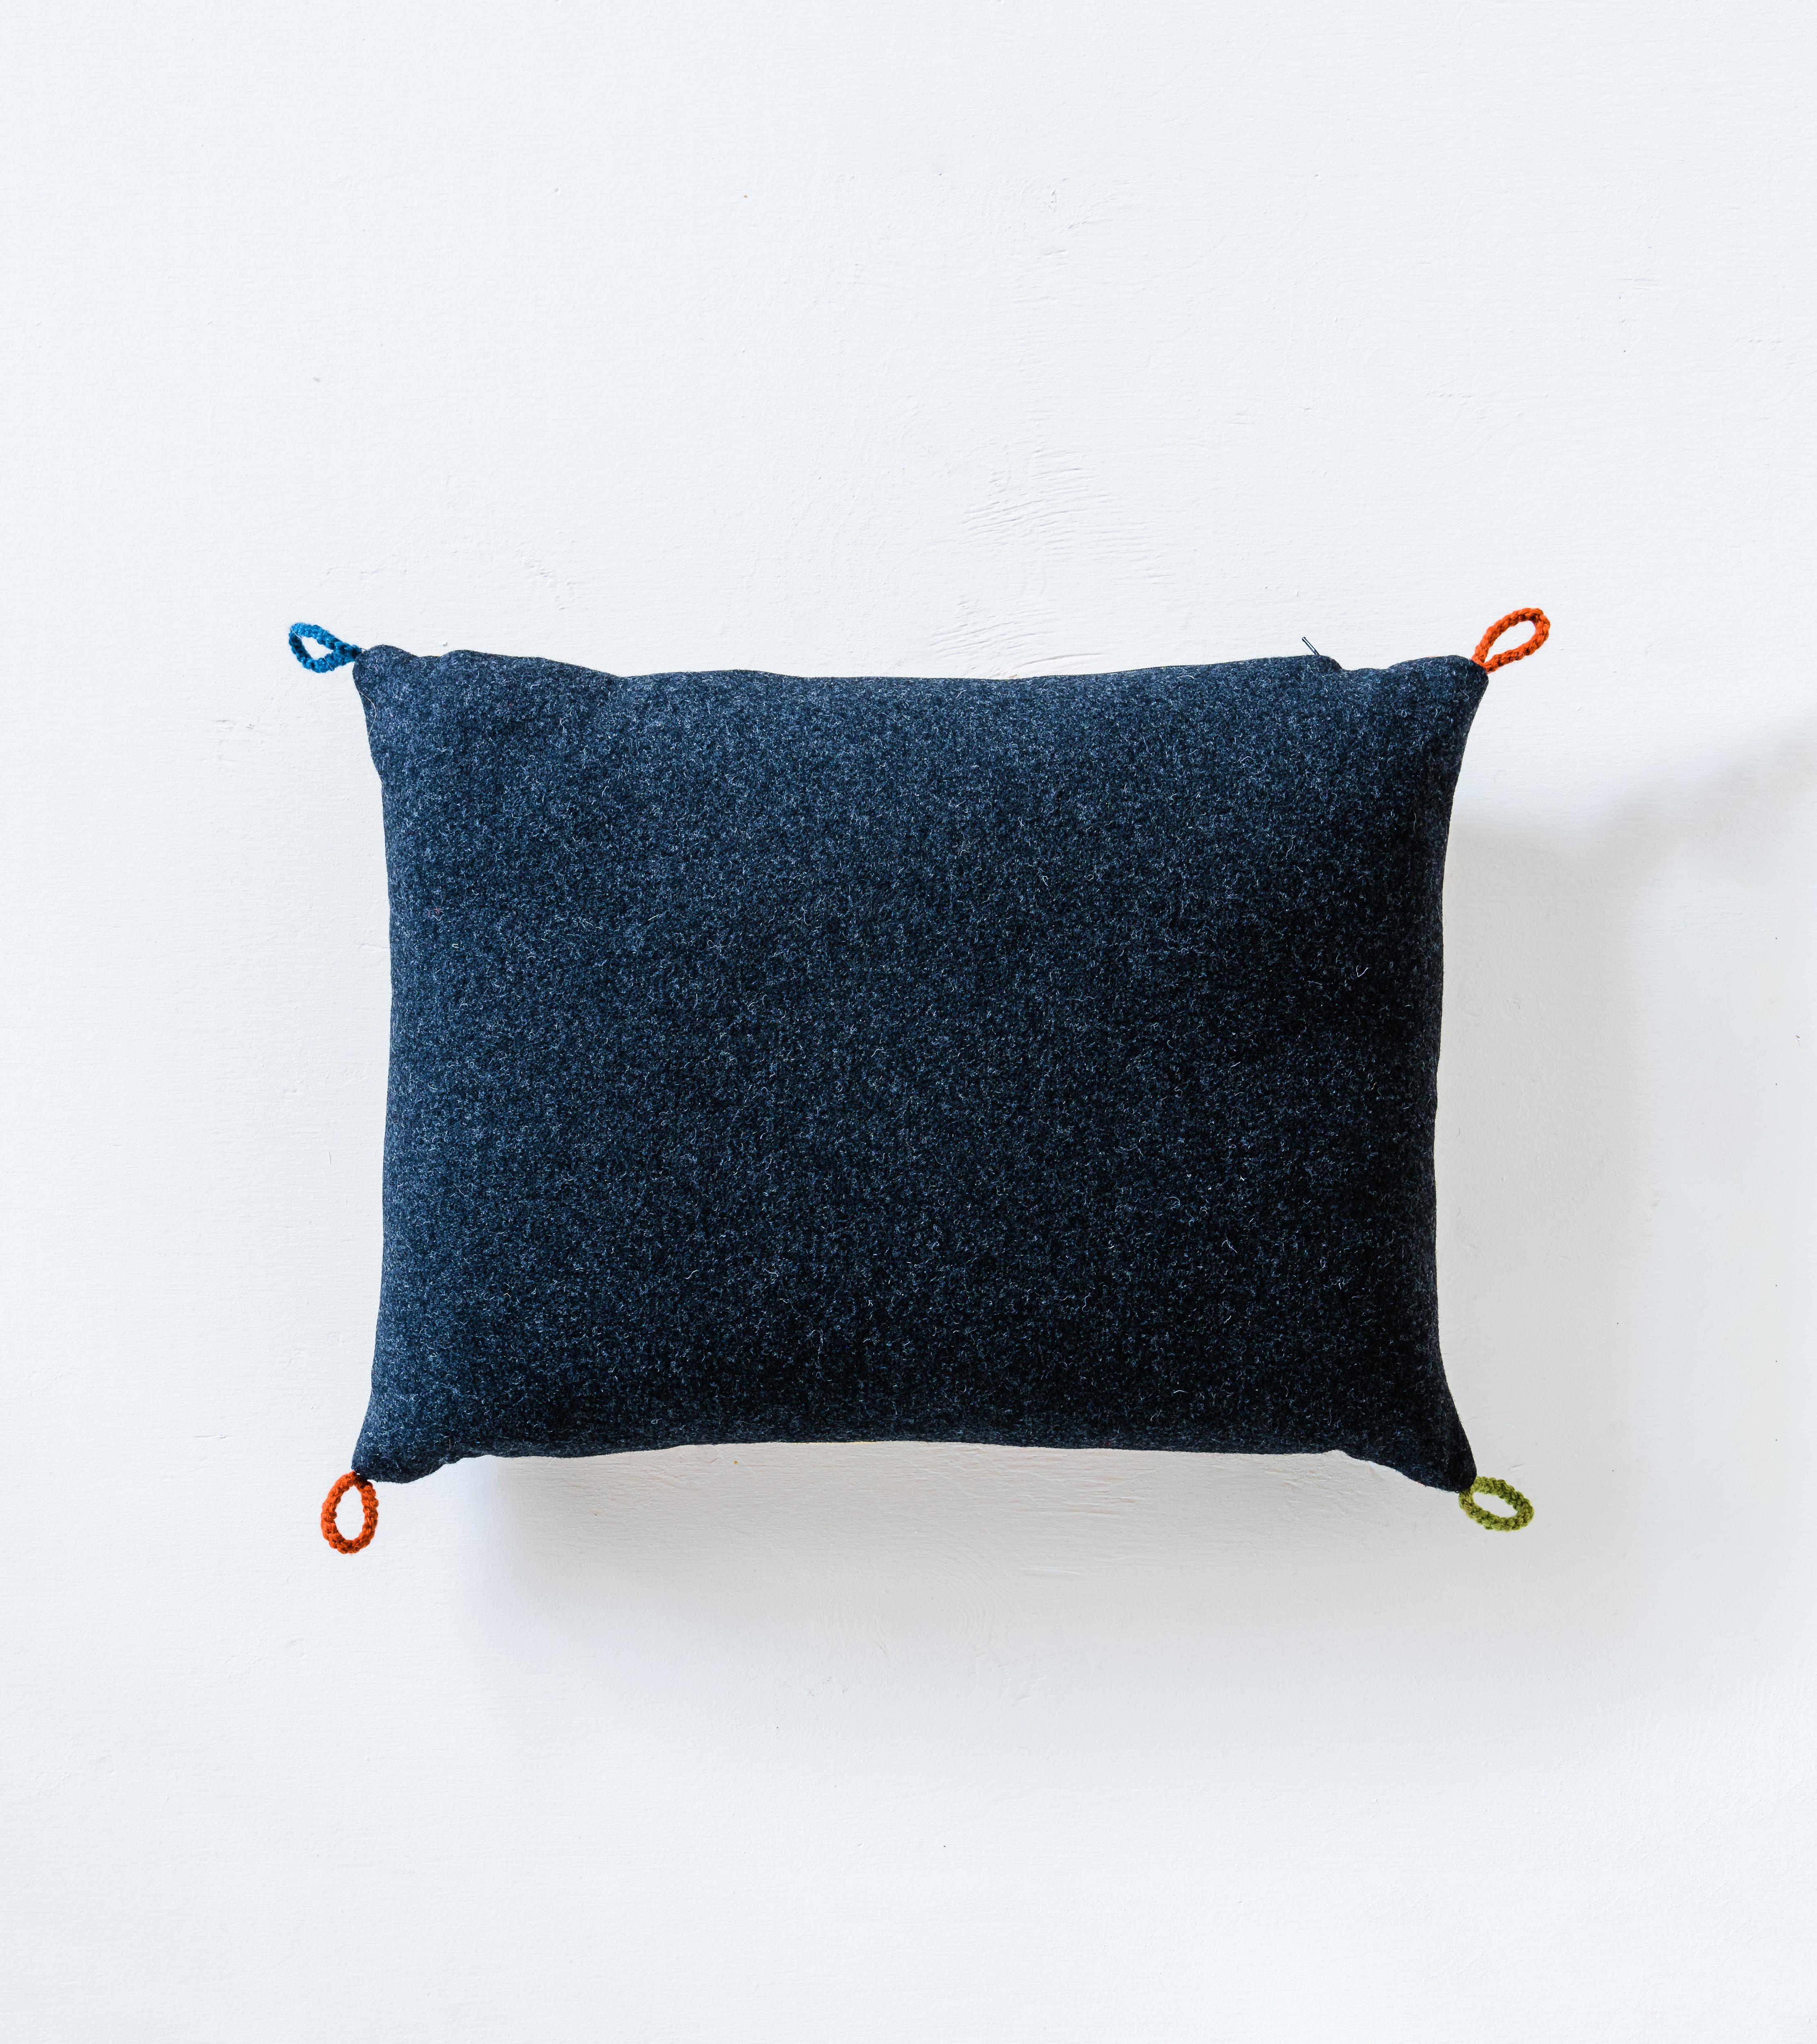 Krabbasnår is an advanced Swedish Scanian weaving technicue. 100% wool handwoven ca 1940.  The back is made of black wool.

These pillows are historical and unique.

Sizes 45 x 58 cm.

Comes with inner pillow made of 100% recycled feathers. 